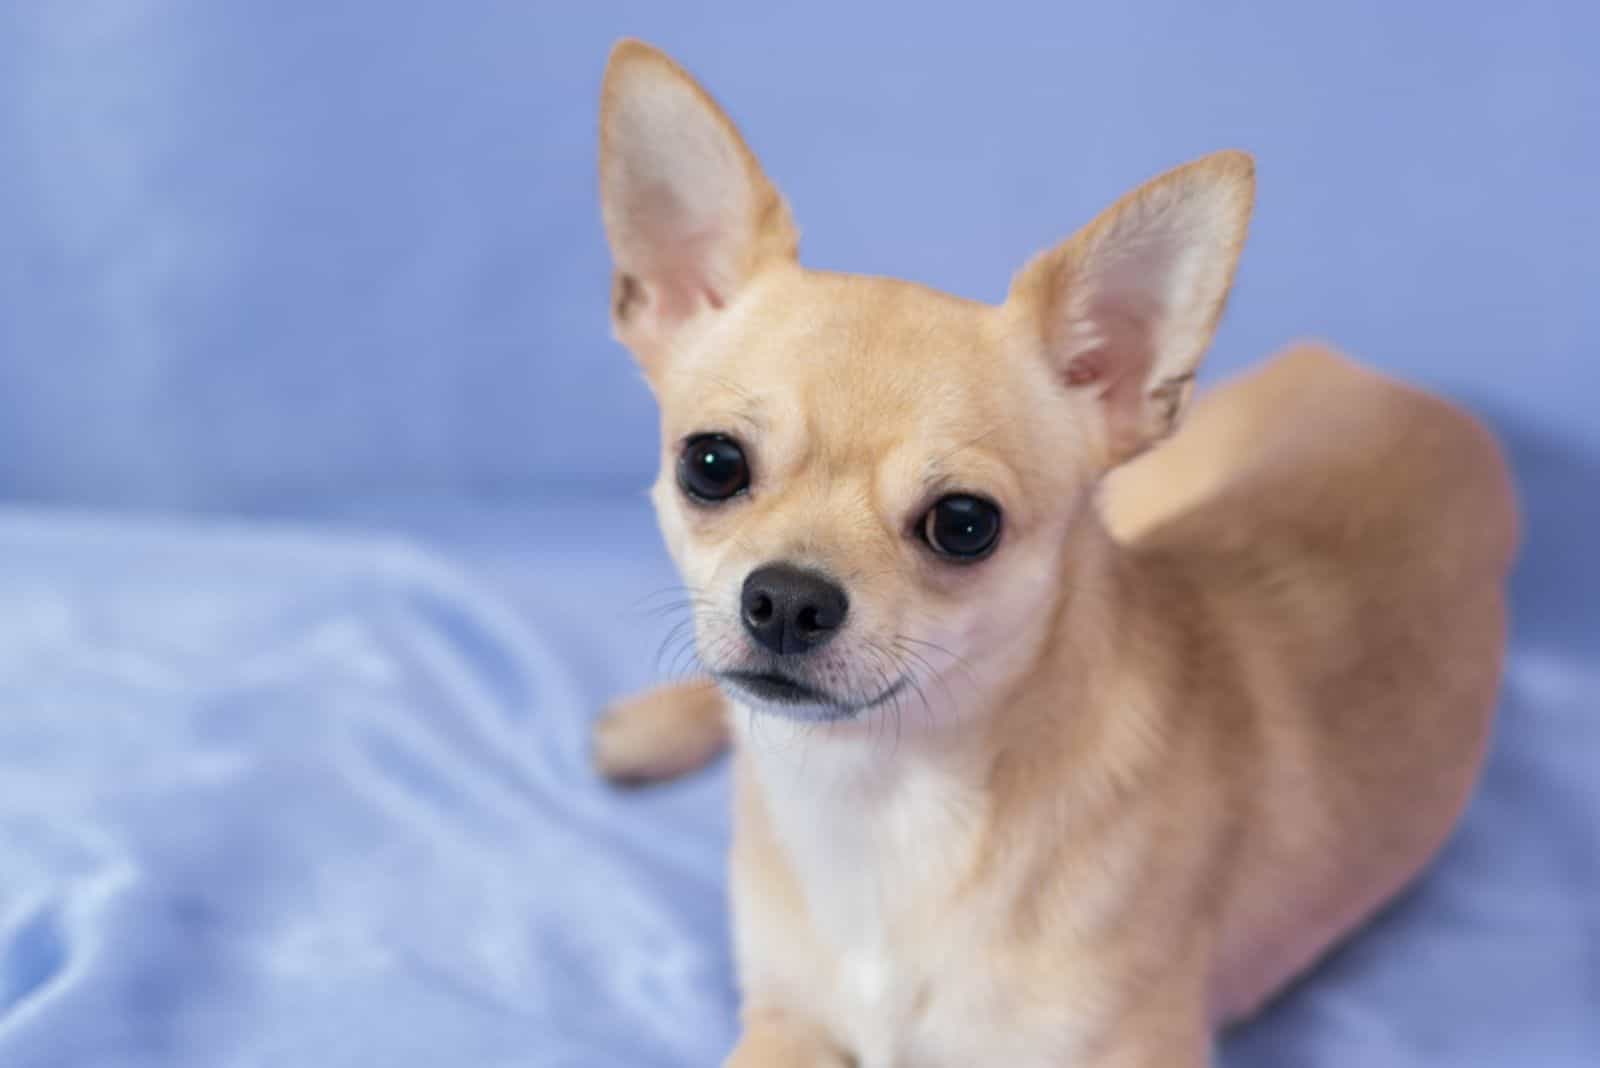 Chihuahua puppy lying on blue background